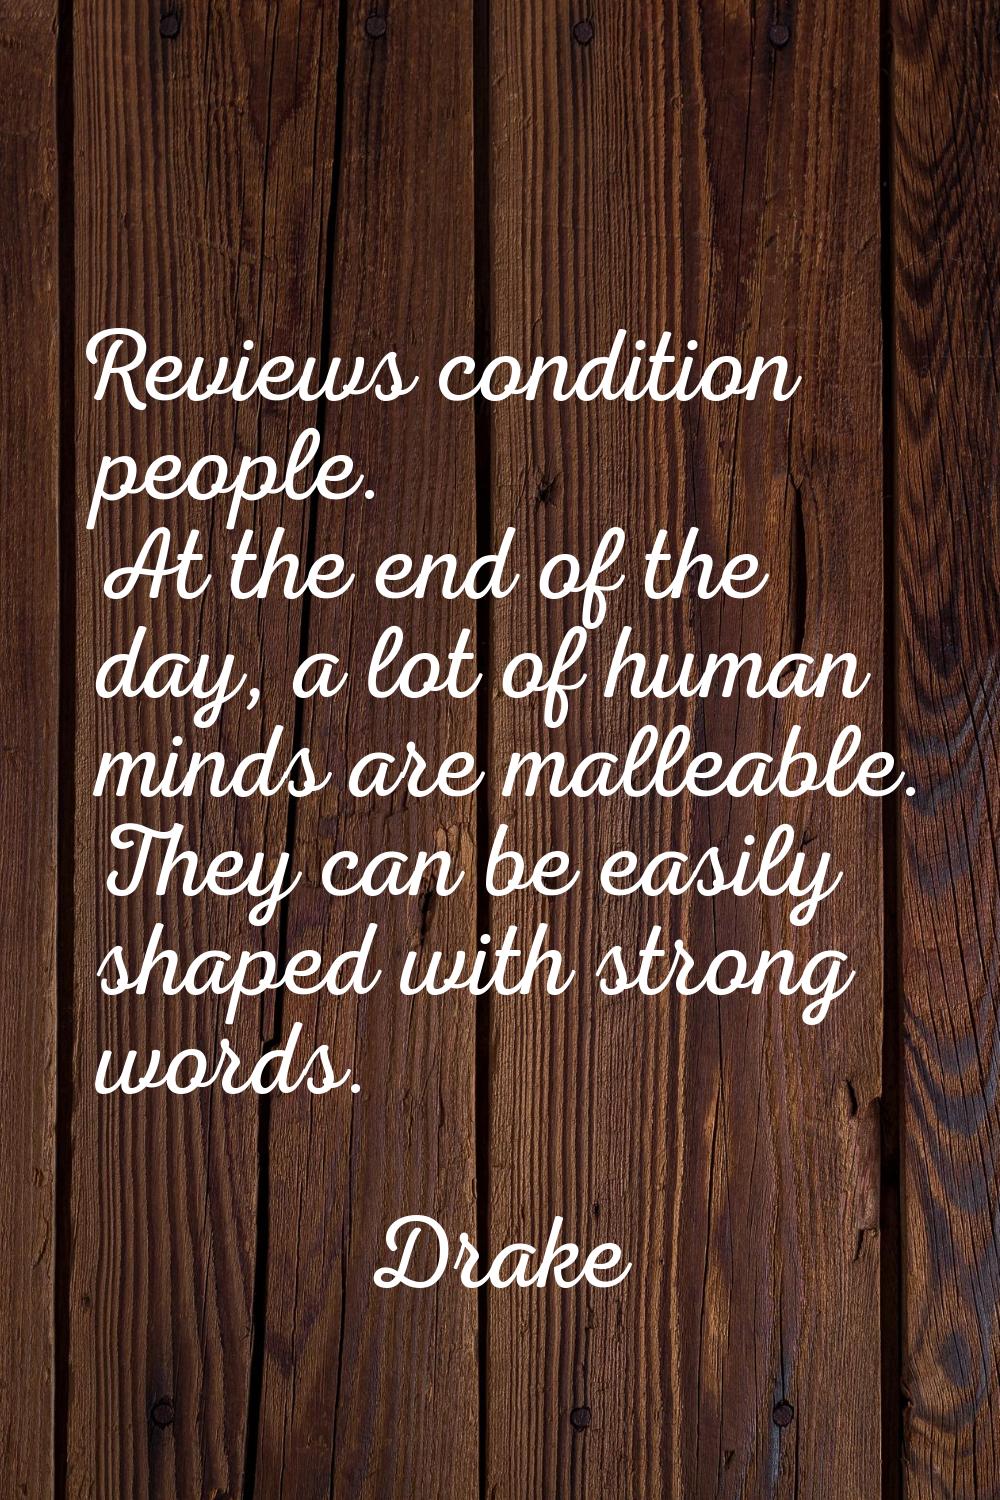 Reviews condition people. At the end of the day, a lot of human minds are malleable. They can be ea